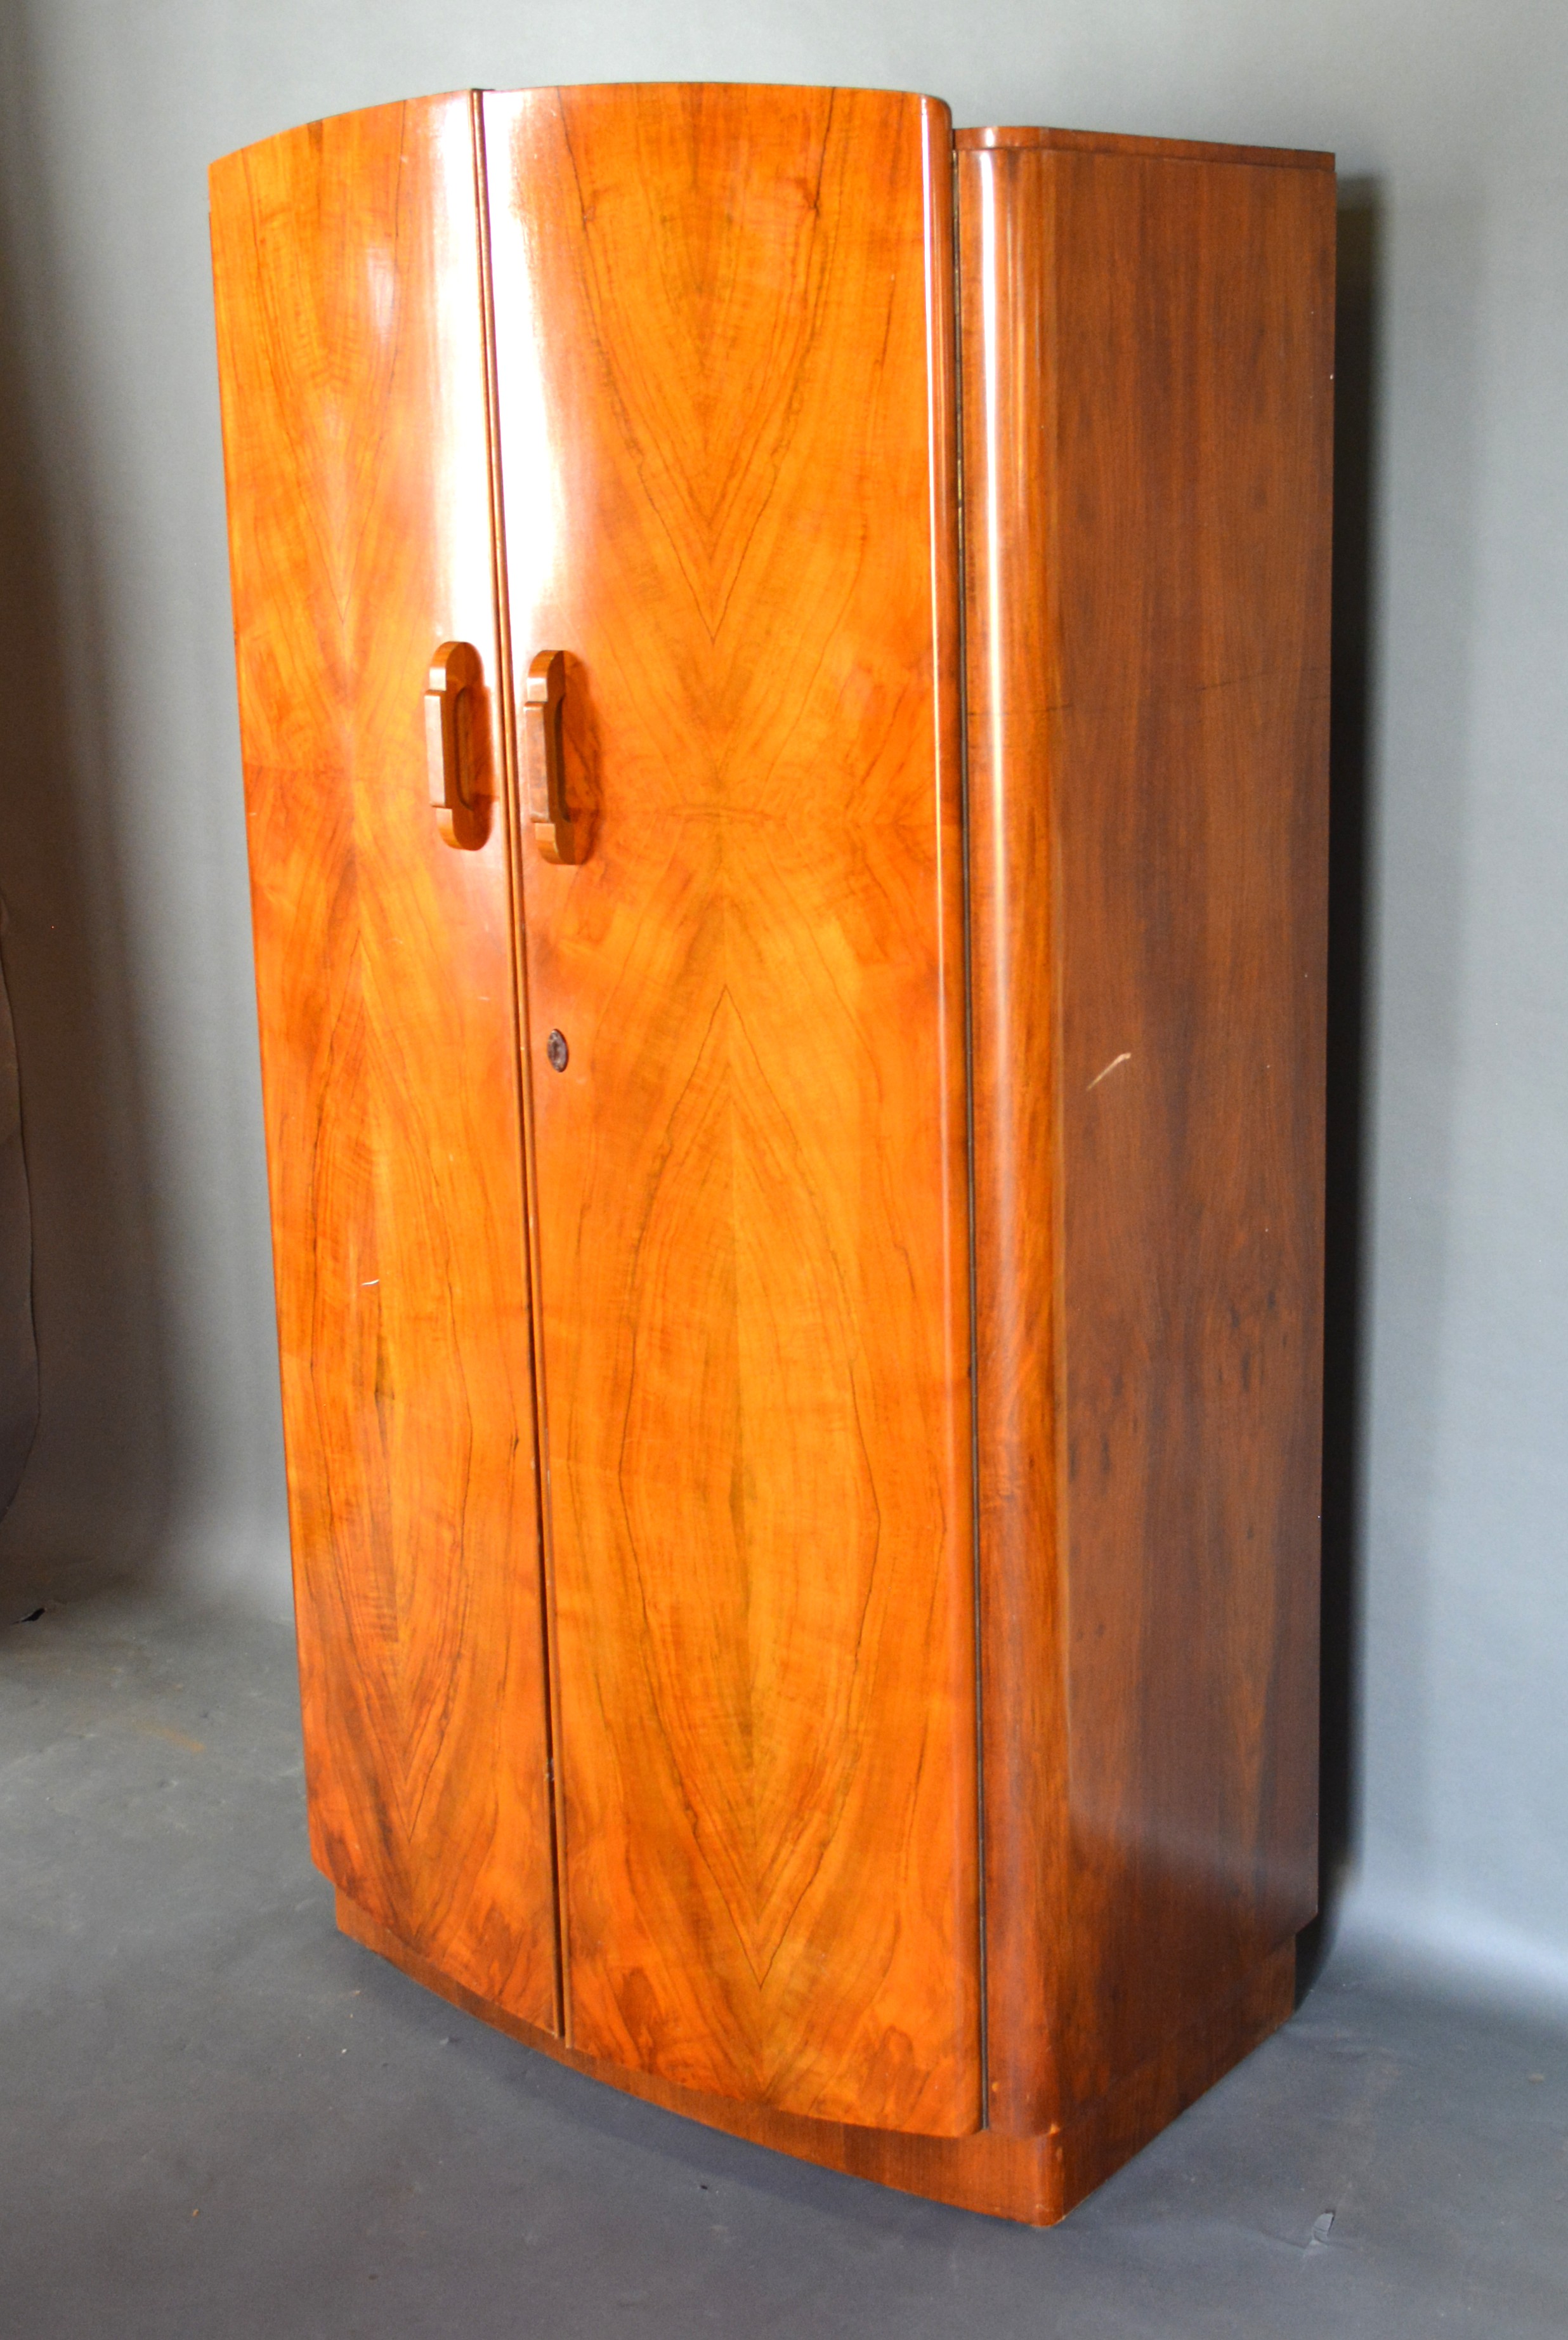 An Art Deco Walnut Bedroom Suite comprising dressing table, two wardrobes and a bedstead - Image 4 of 4